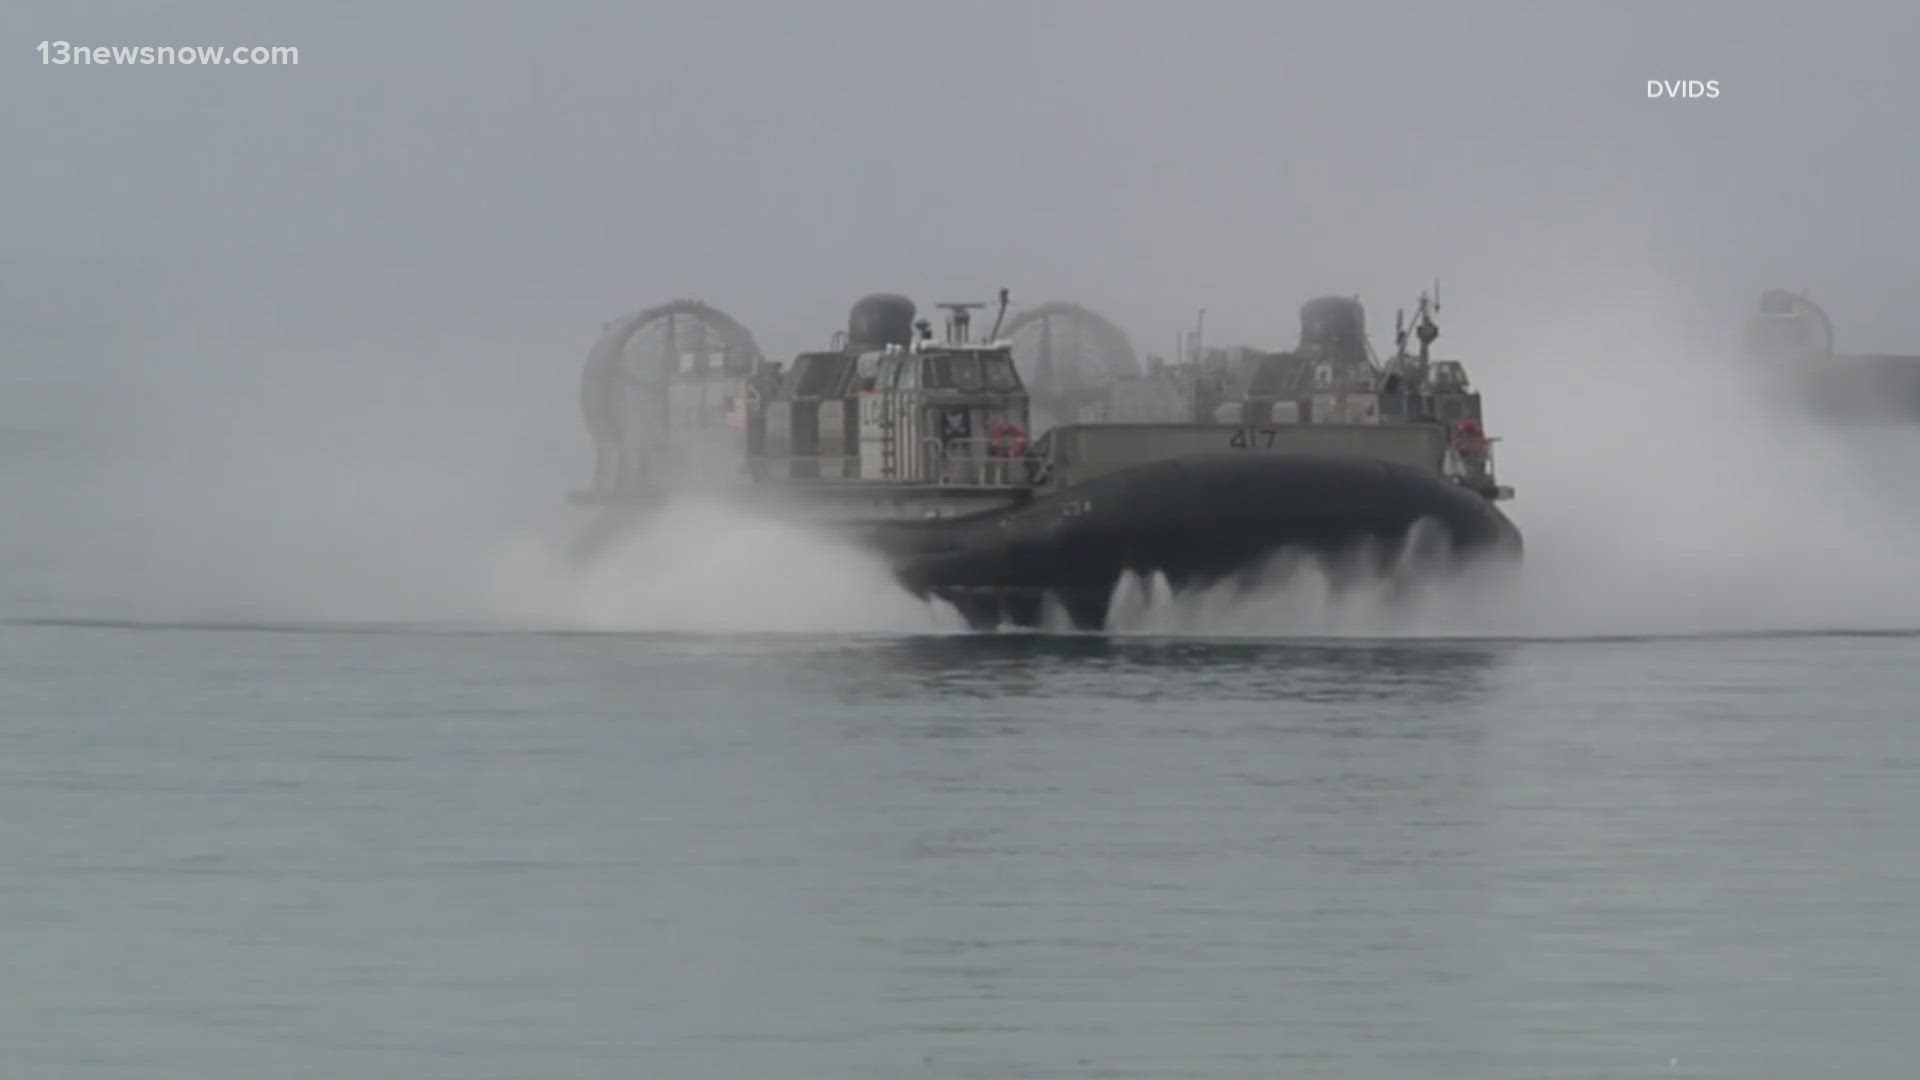 Thirty local sailors and Marines are recovering after what the Navy describes as "an incident" involving two "Landing Craft Air Cushion" hovercraft.